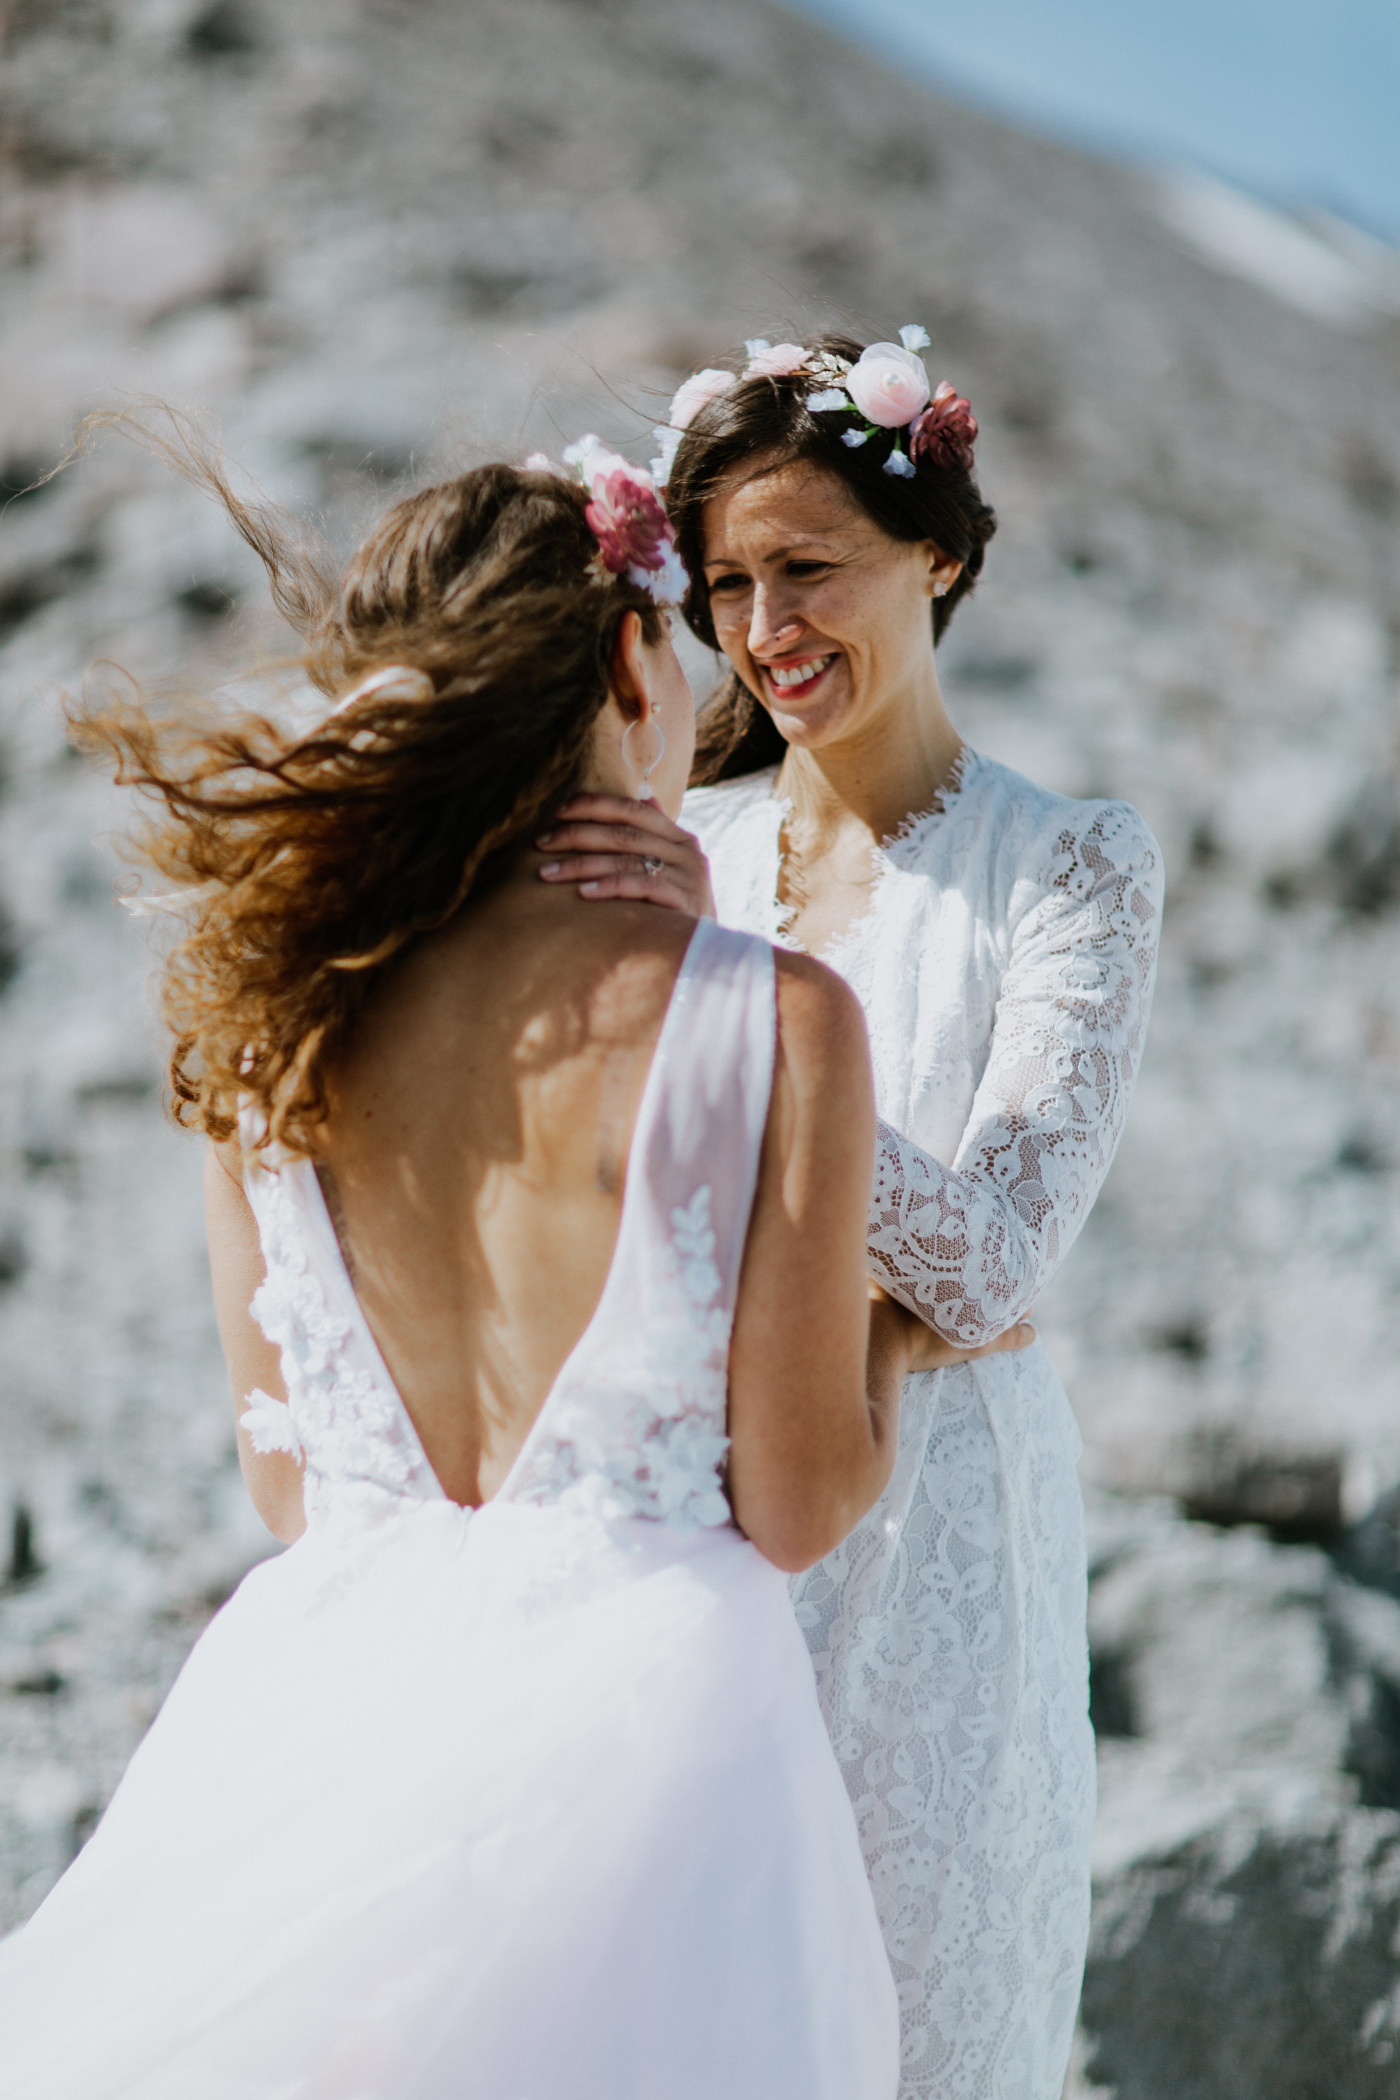 Margaux and Heather admire each other. Elopement photography at Mount Hood by Sienna Plus Josh.